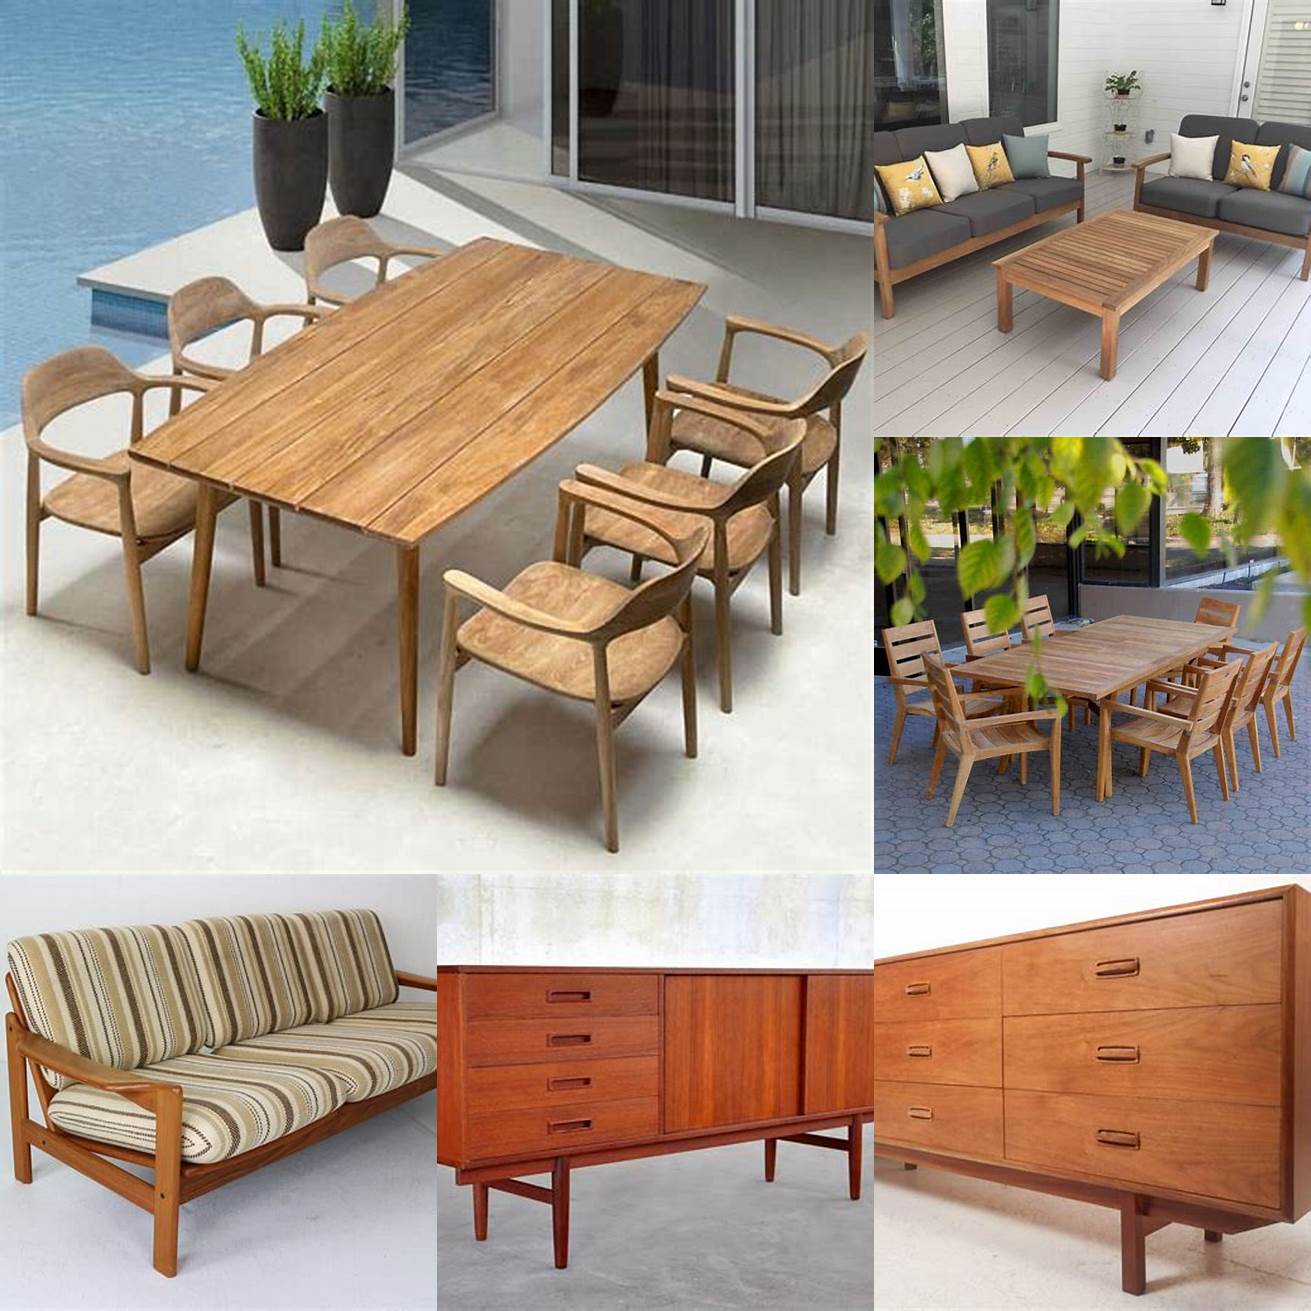 Contemporary forms of teak furniture